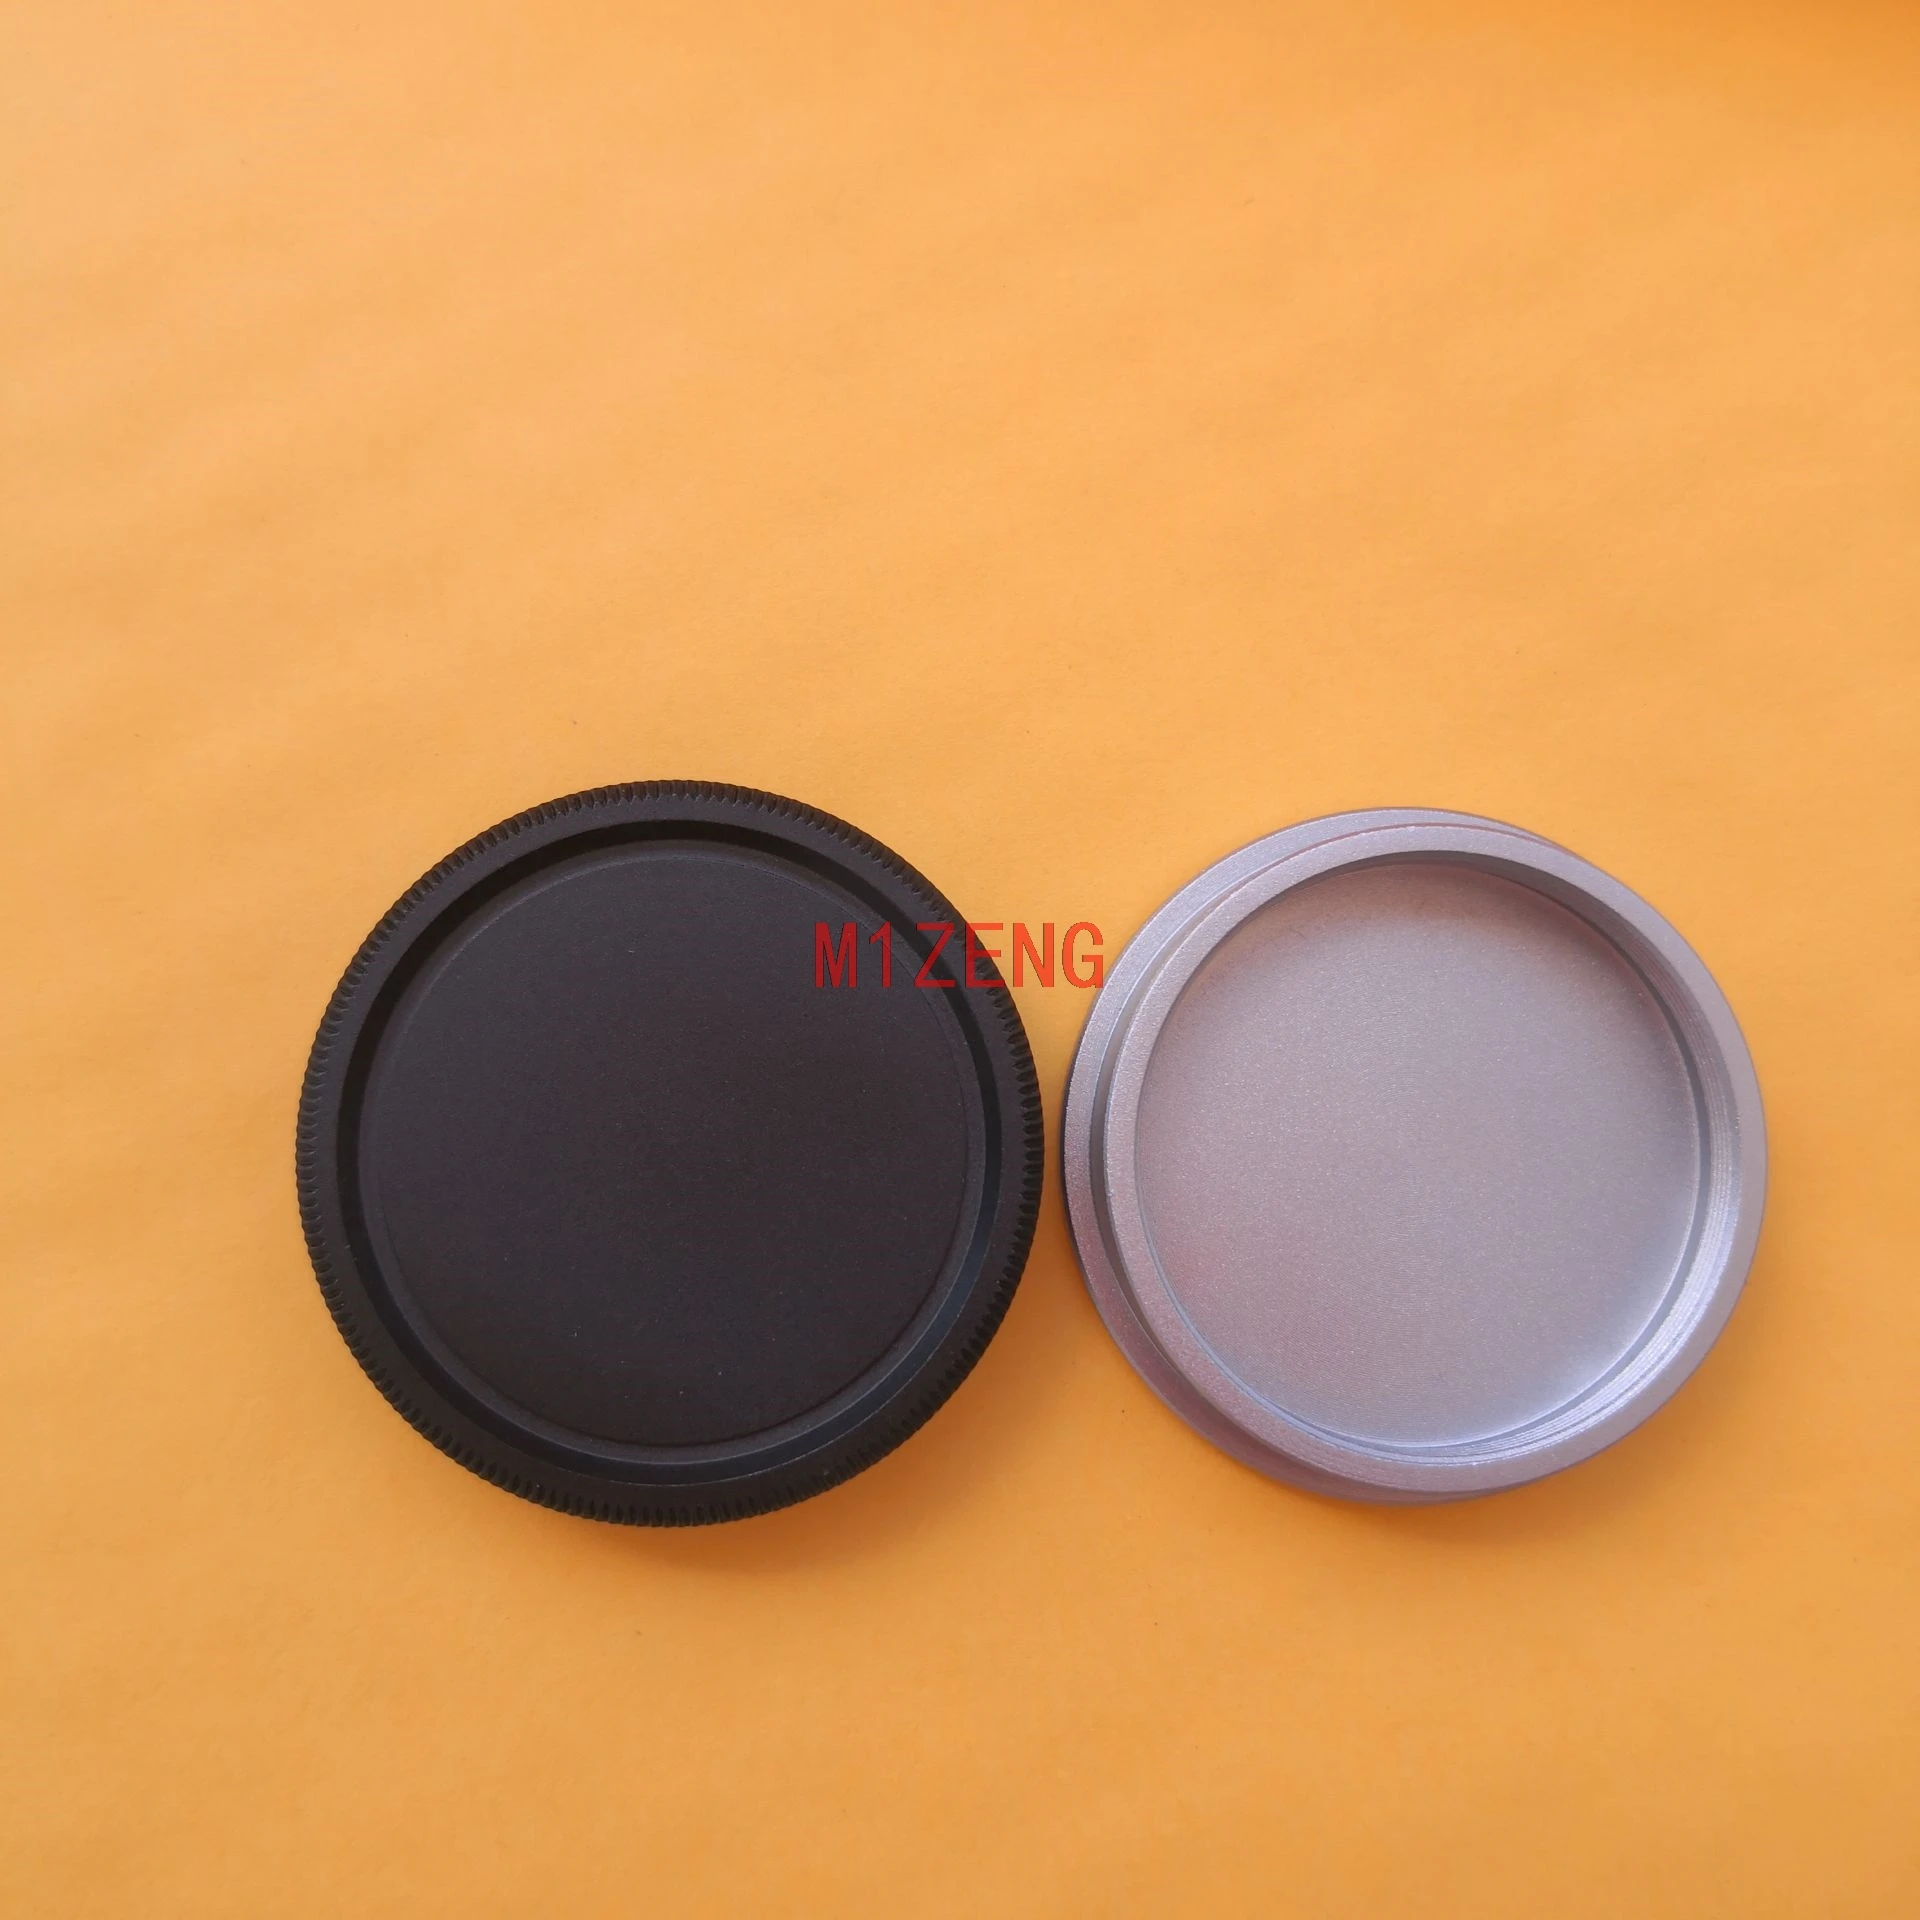 

M37*0.75mm 37mm m37 metal Rear Lens Cap/Cover dust protector for 37 mm camera cctv movie lens black silver